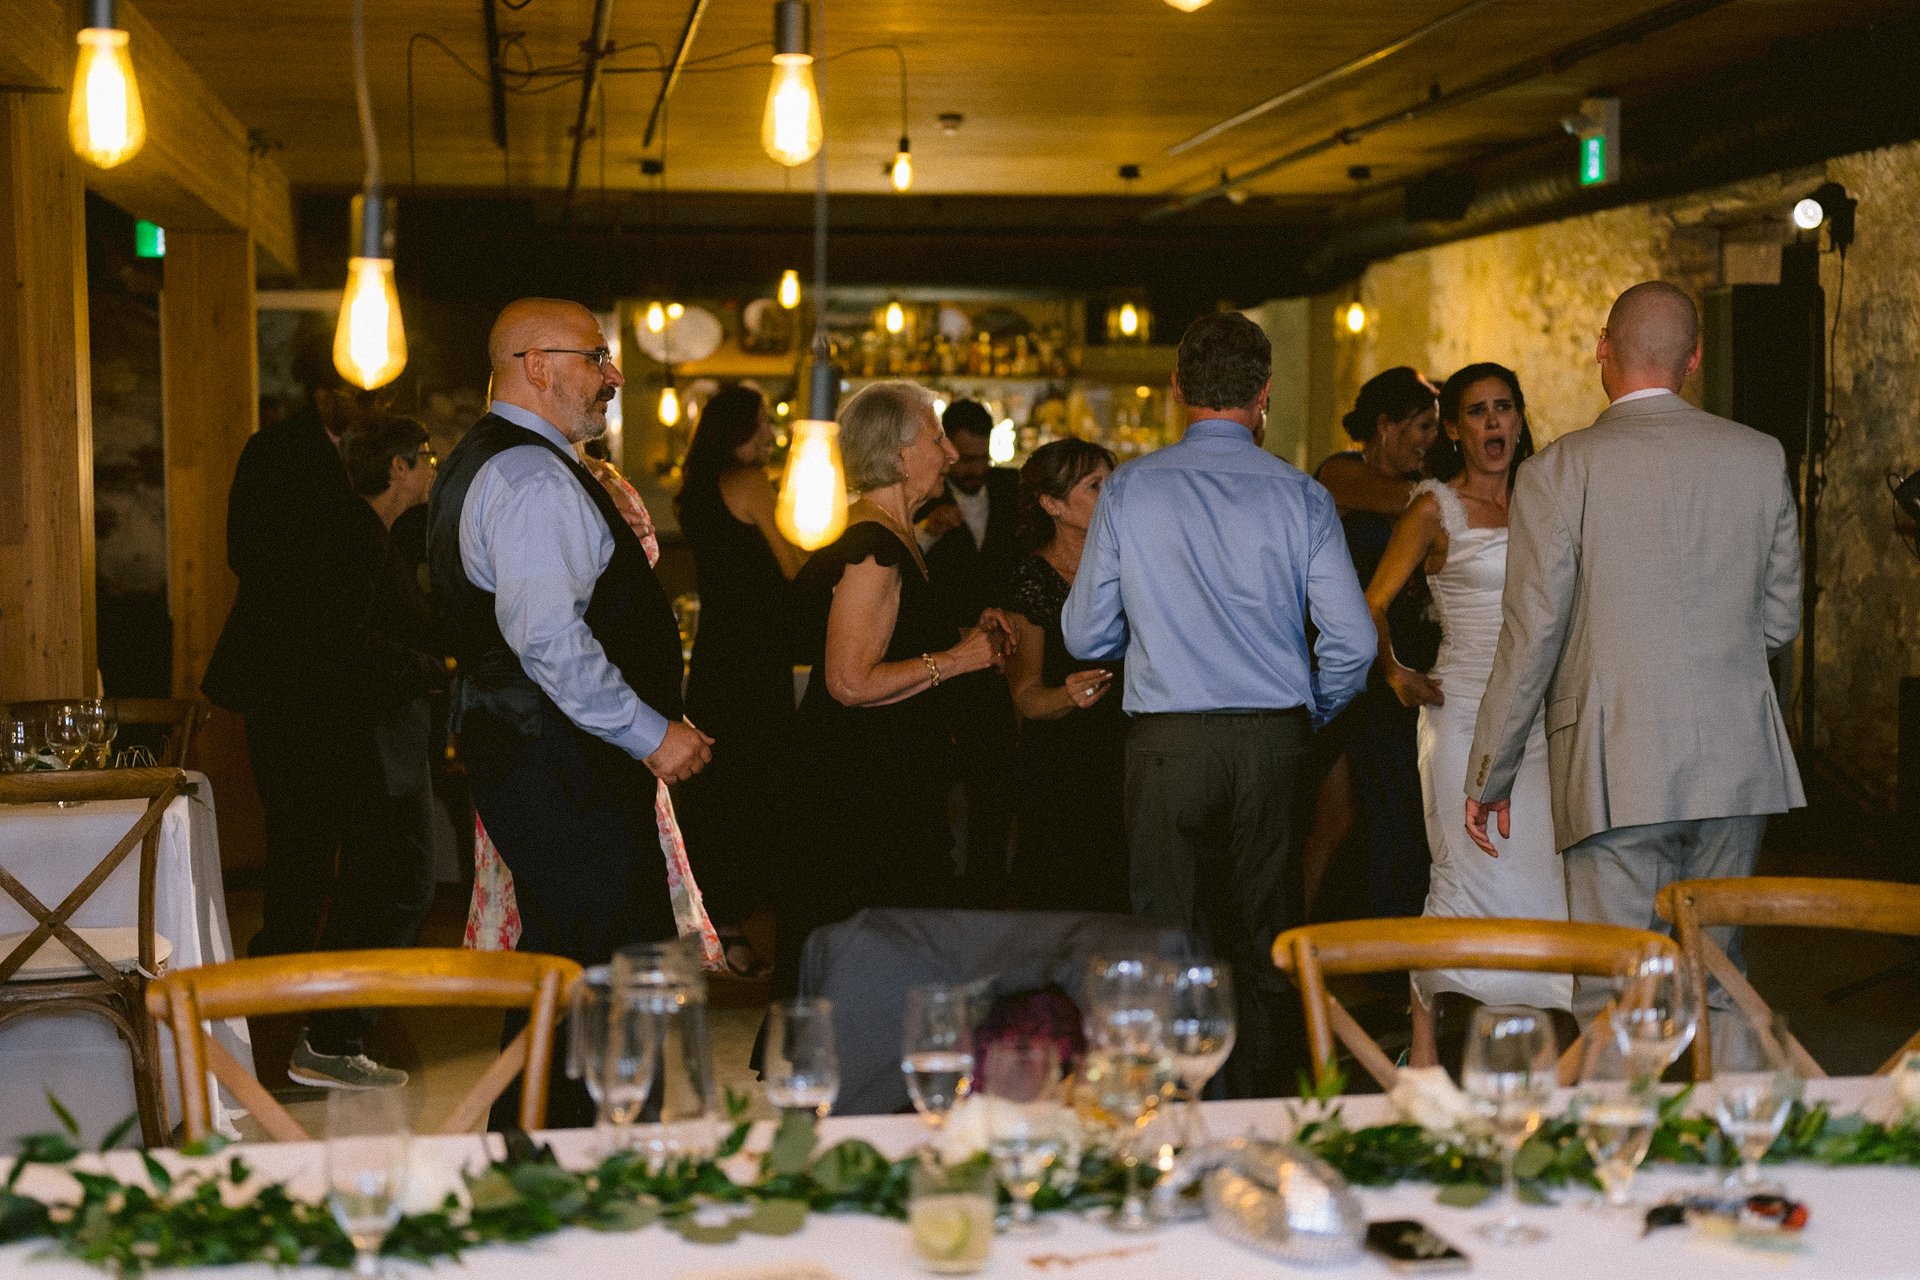 Guests joined the couple on the dance floor when Toronto wedding photographer took a wide shot of the event.